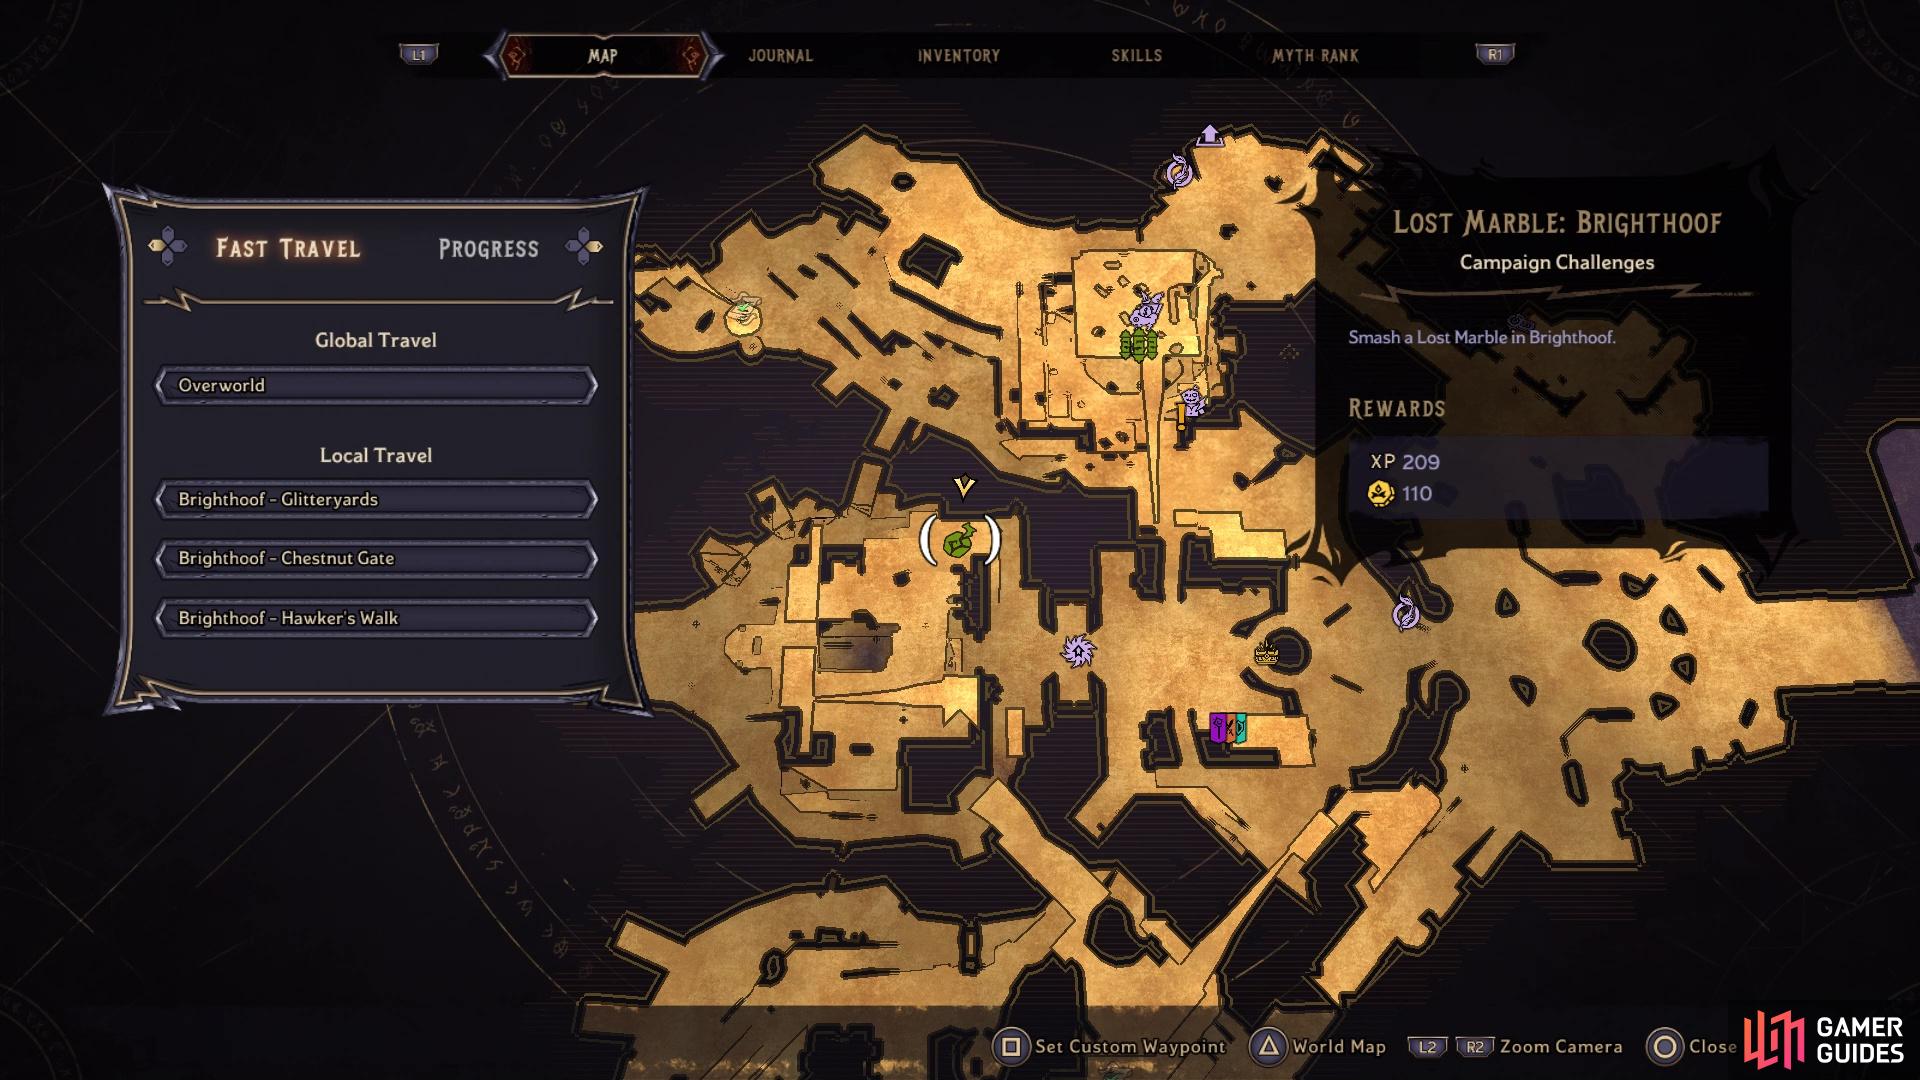 The Lost Marble location on the map